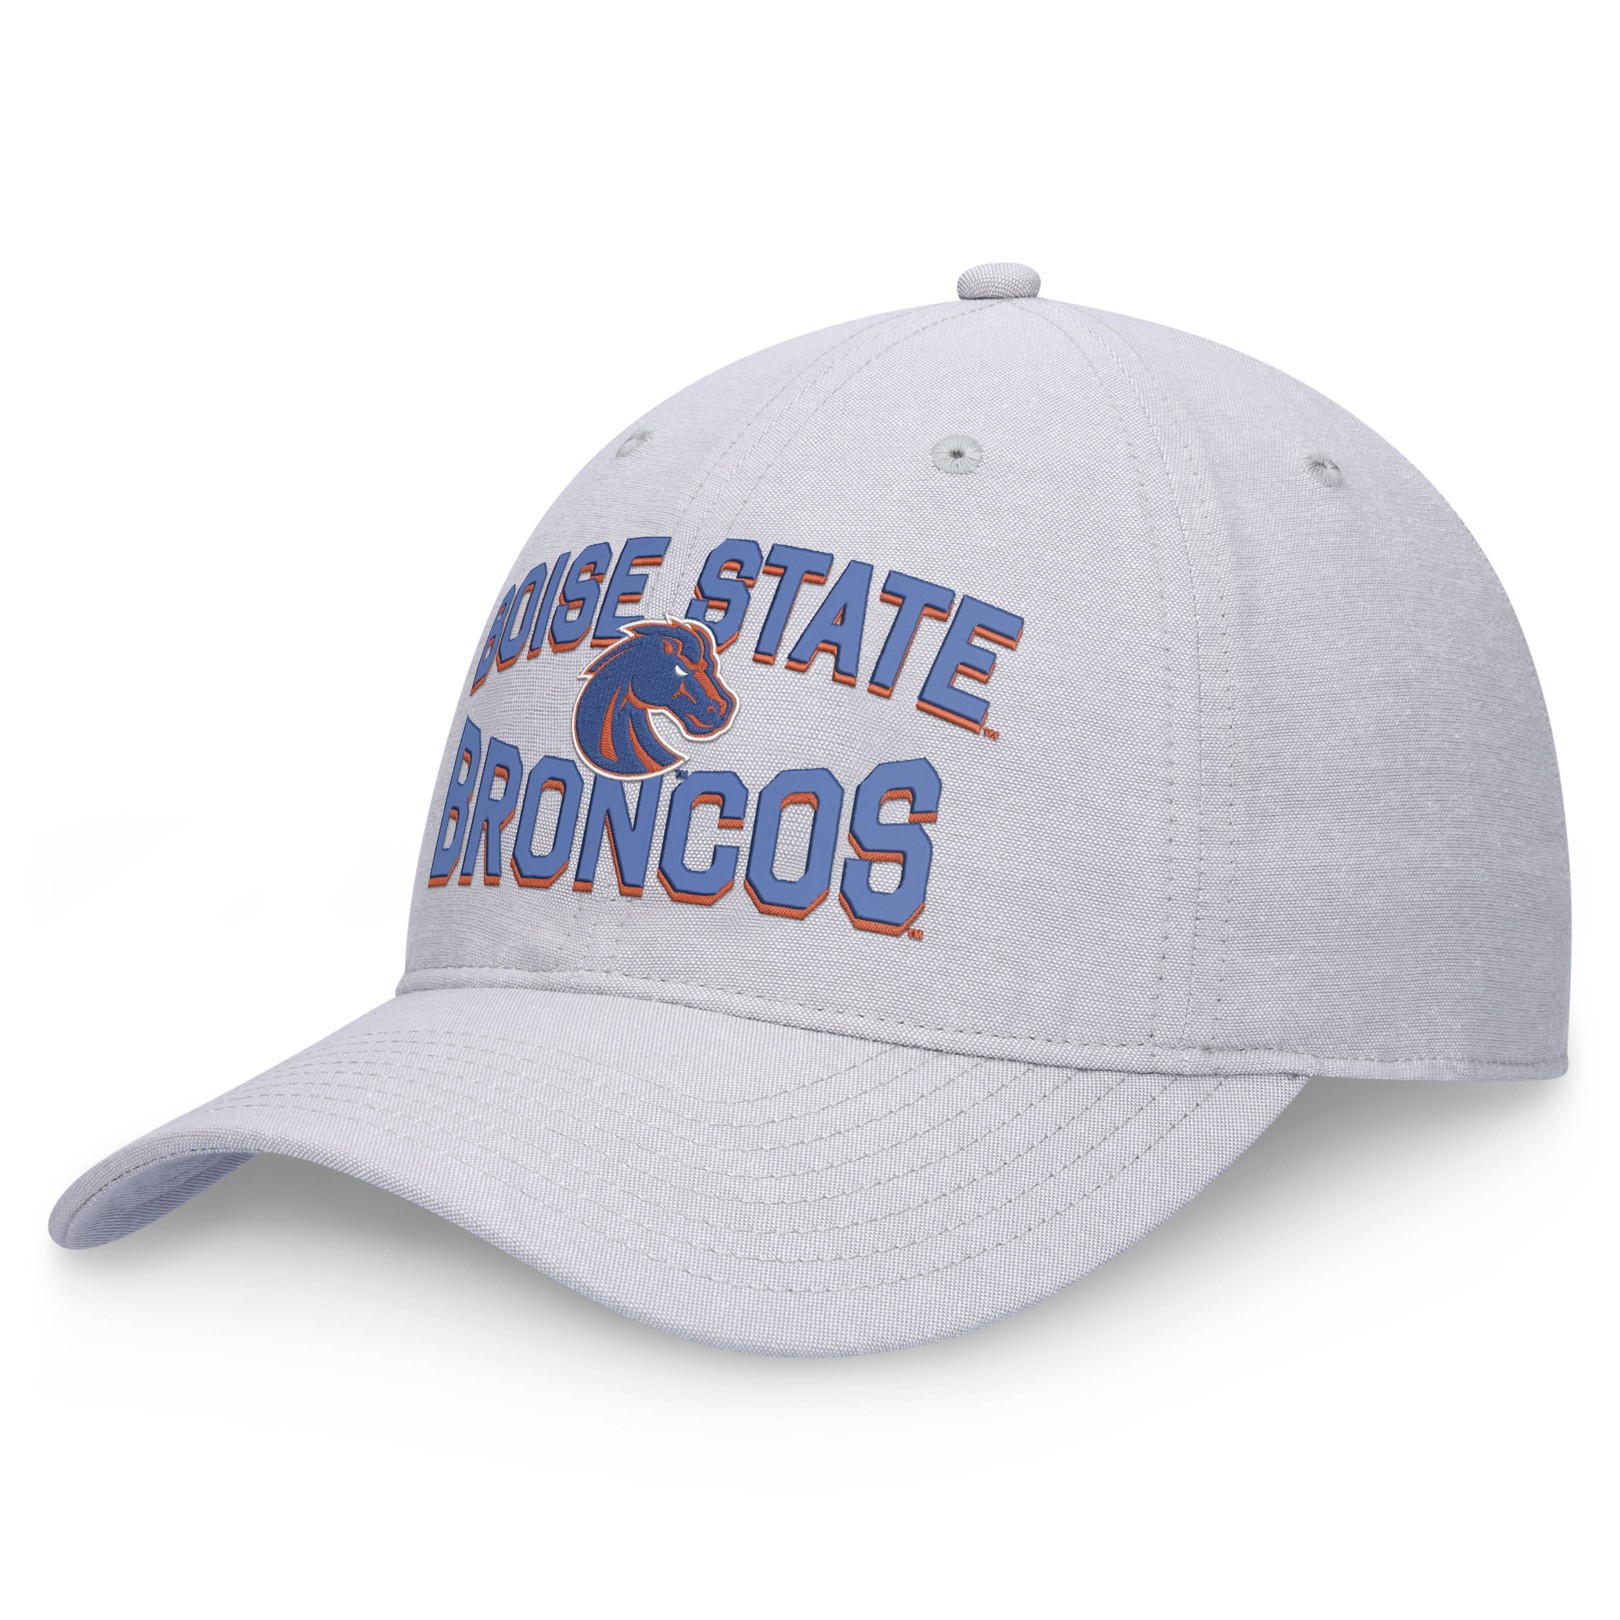 NCAA Boise State Broncos Casual Unstructured Cotton Poly Hat 1 ct